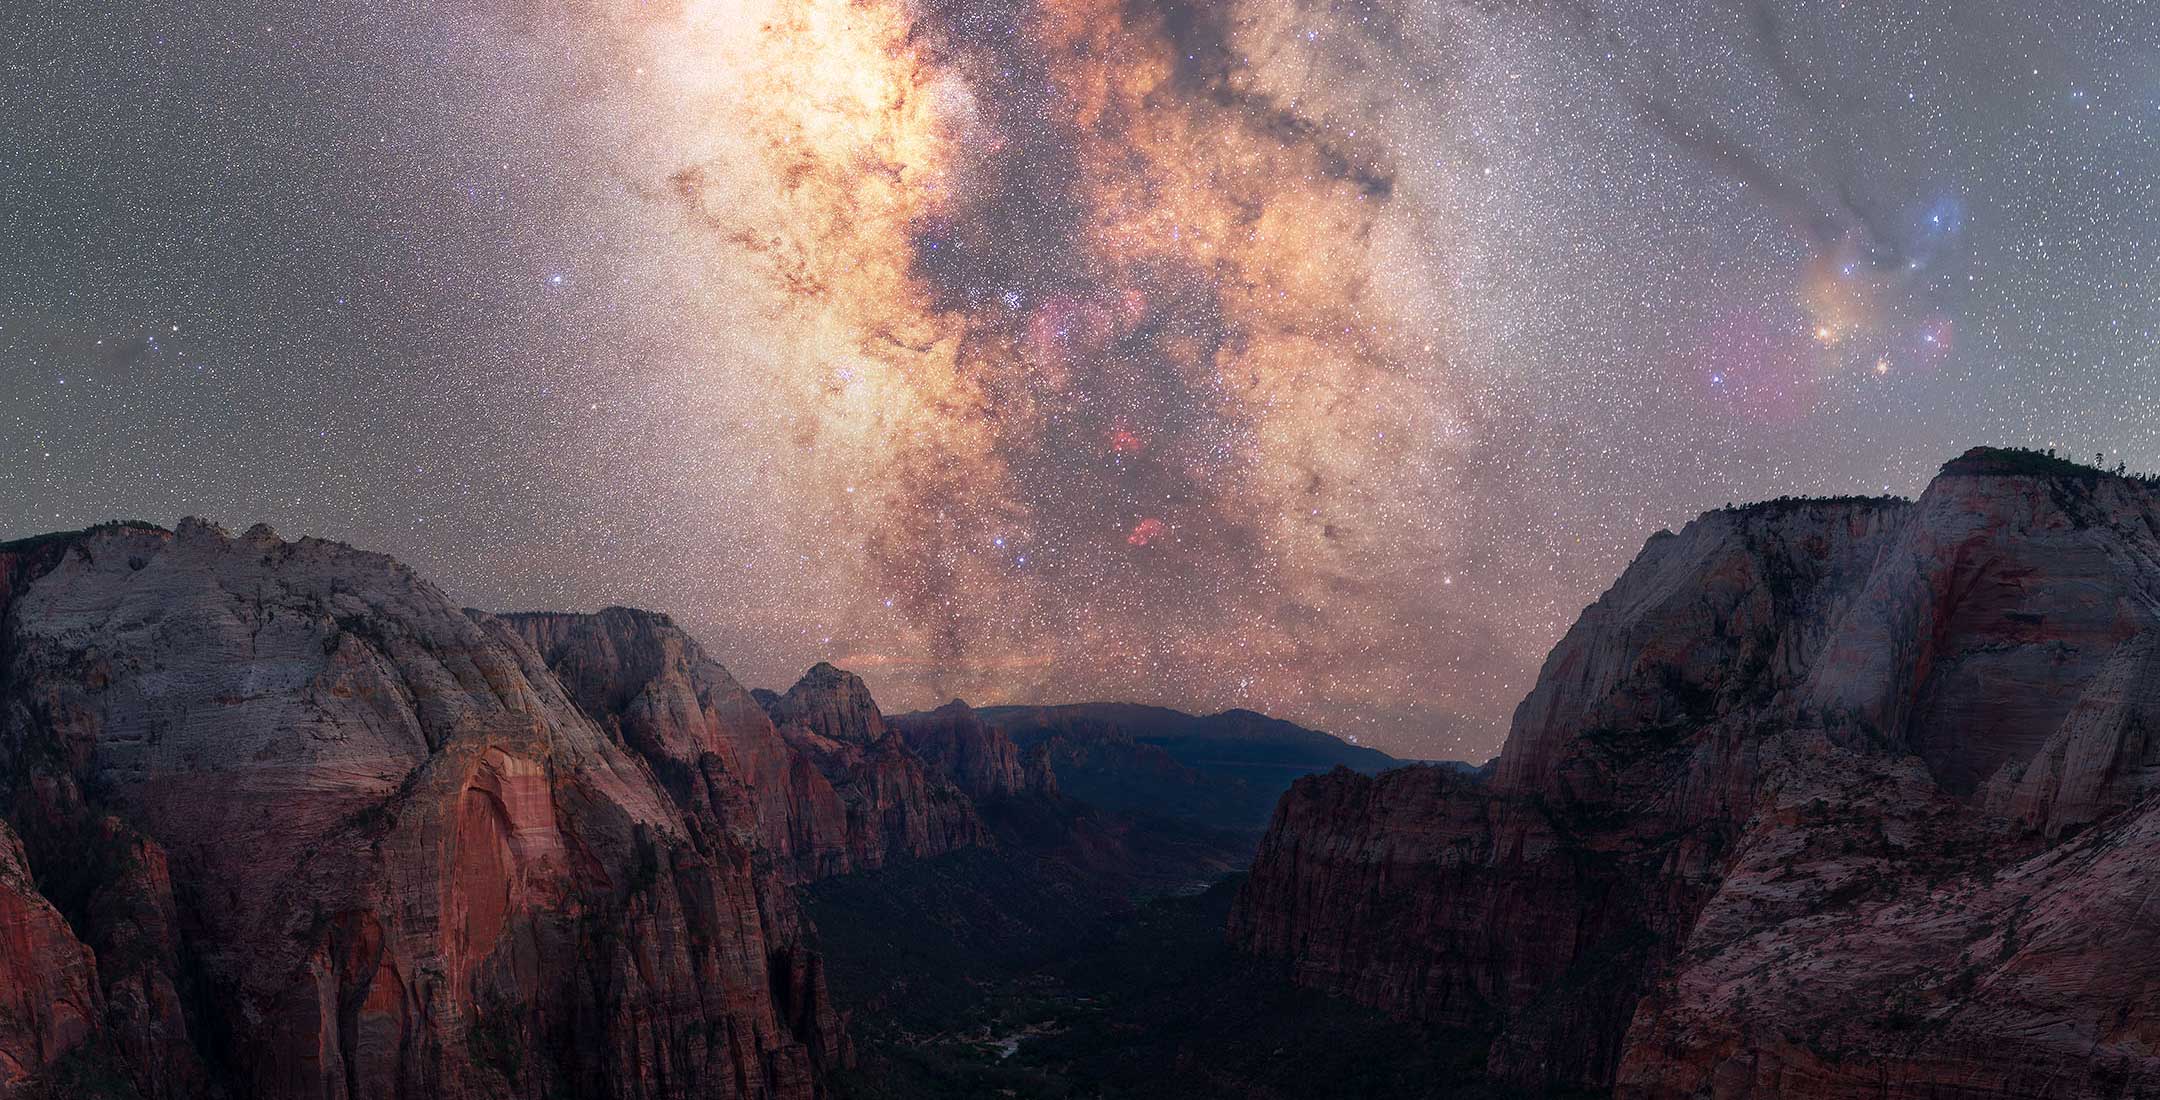 Milky Way over majestic canyon at night